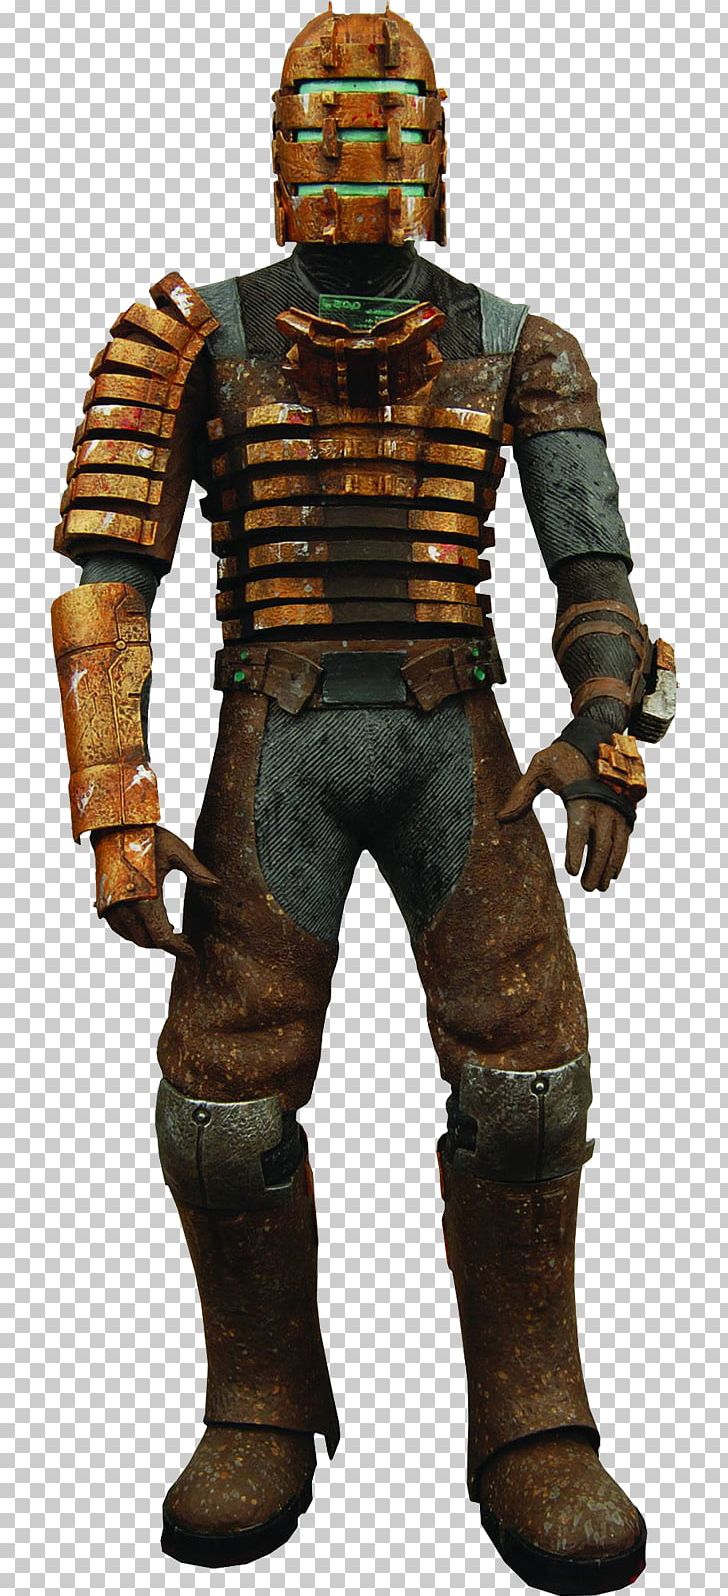 Dead Space 3 Dead Space 2 Isaac Clarke Video Games Png Clipart 26th Century Action Toy